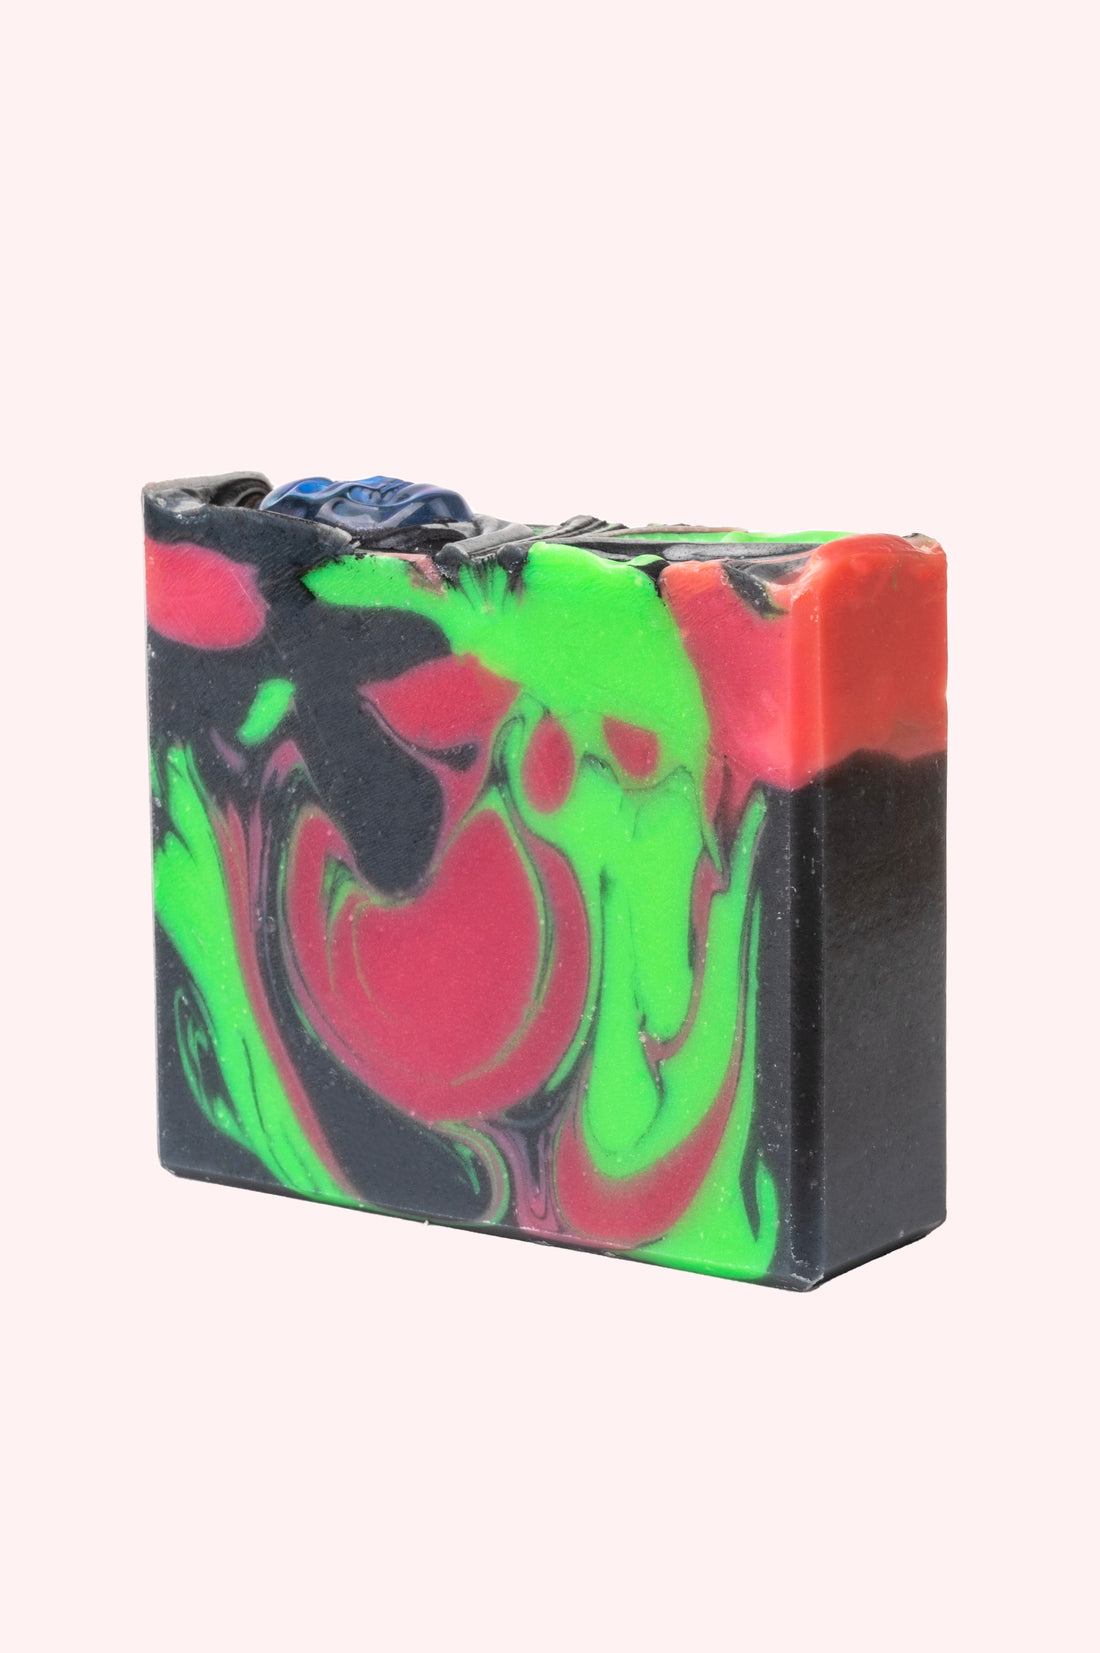 Limited Edition Feast of Apples Artisan Soap